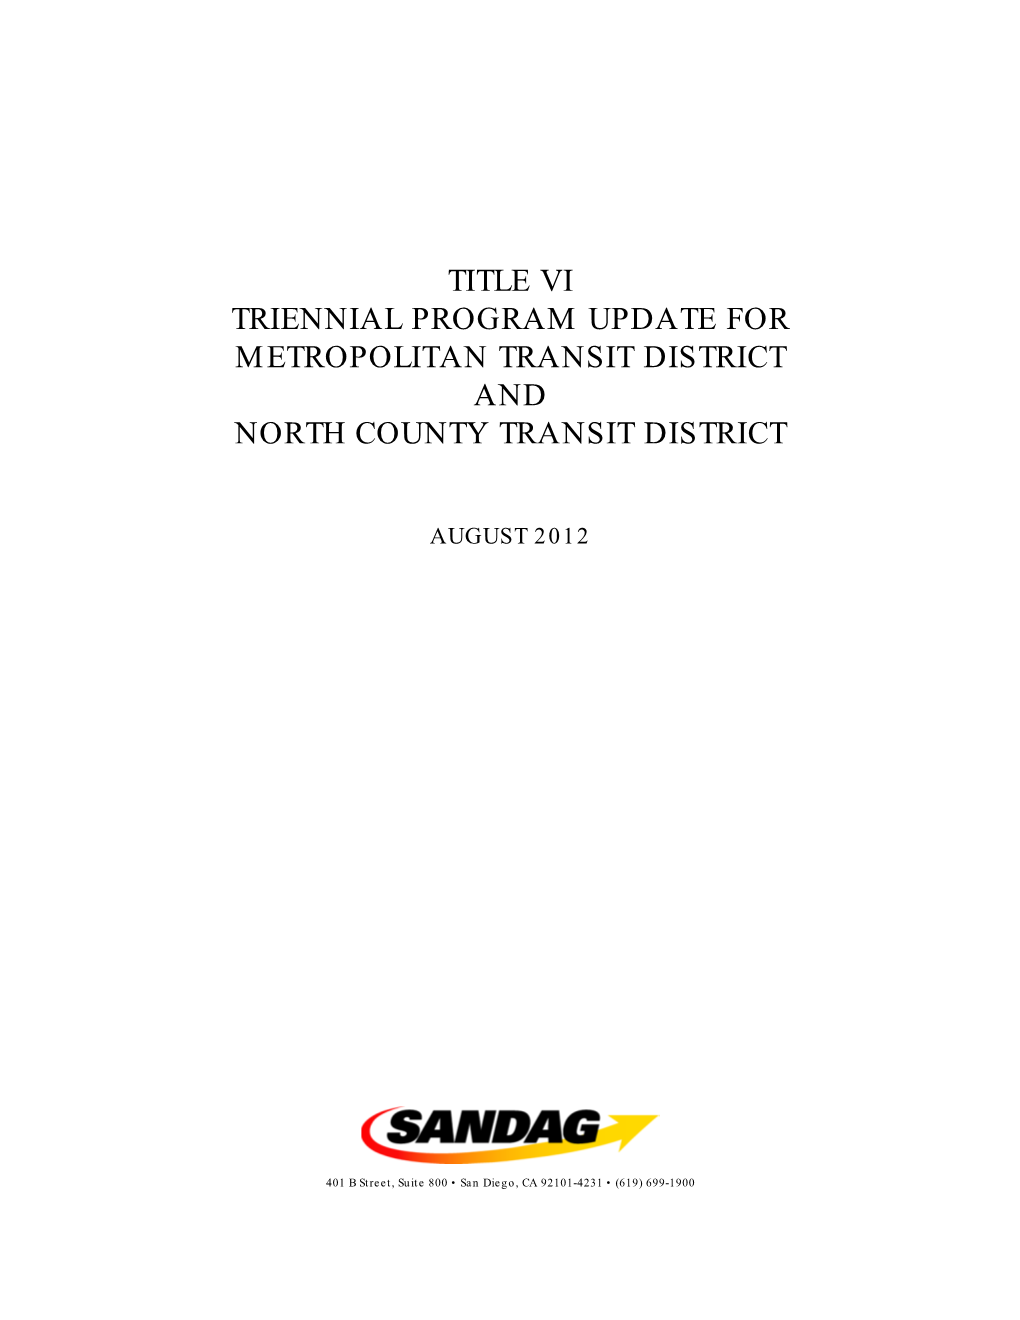 Title Vi Triennial Program Update for Metropolitan Transit District and North County Transit District